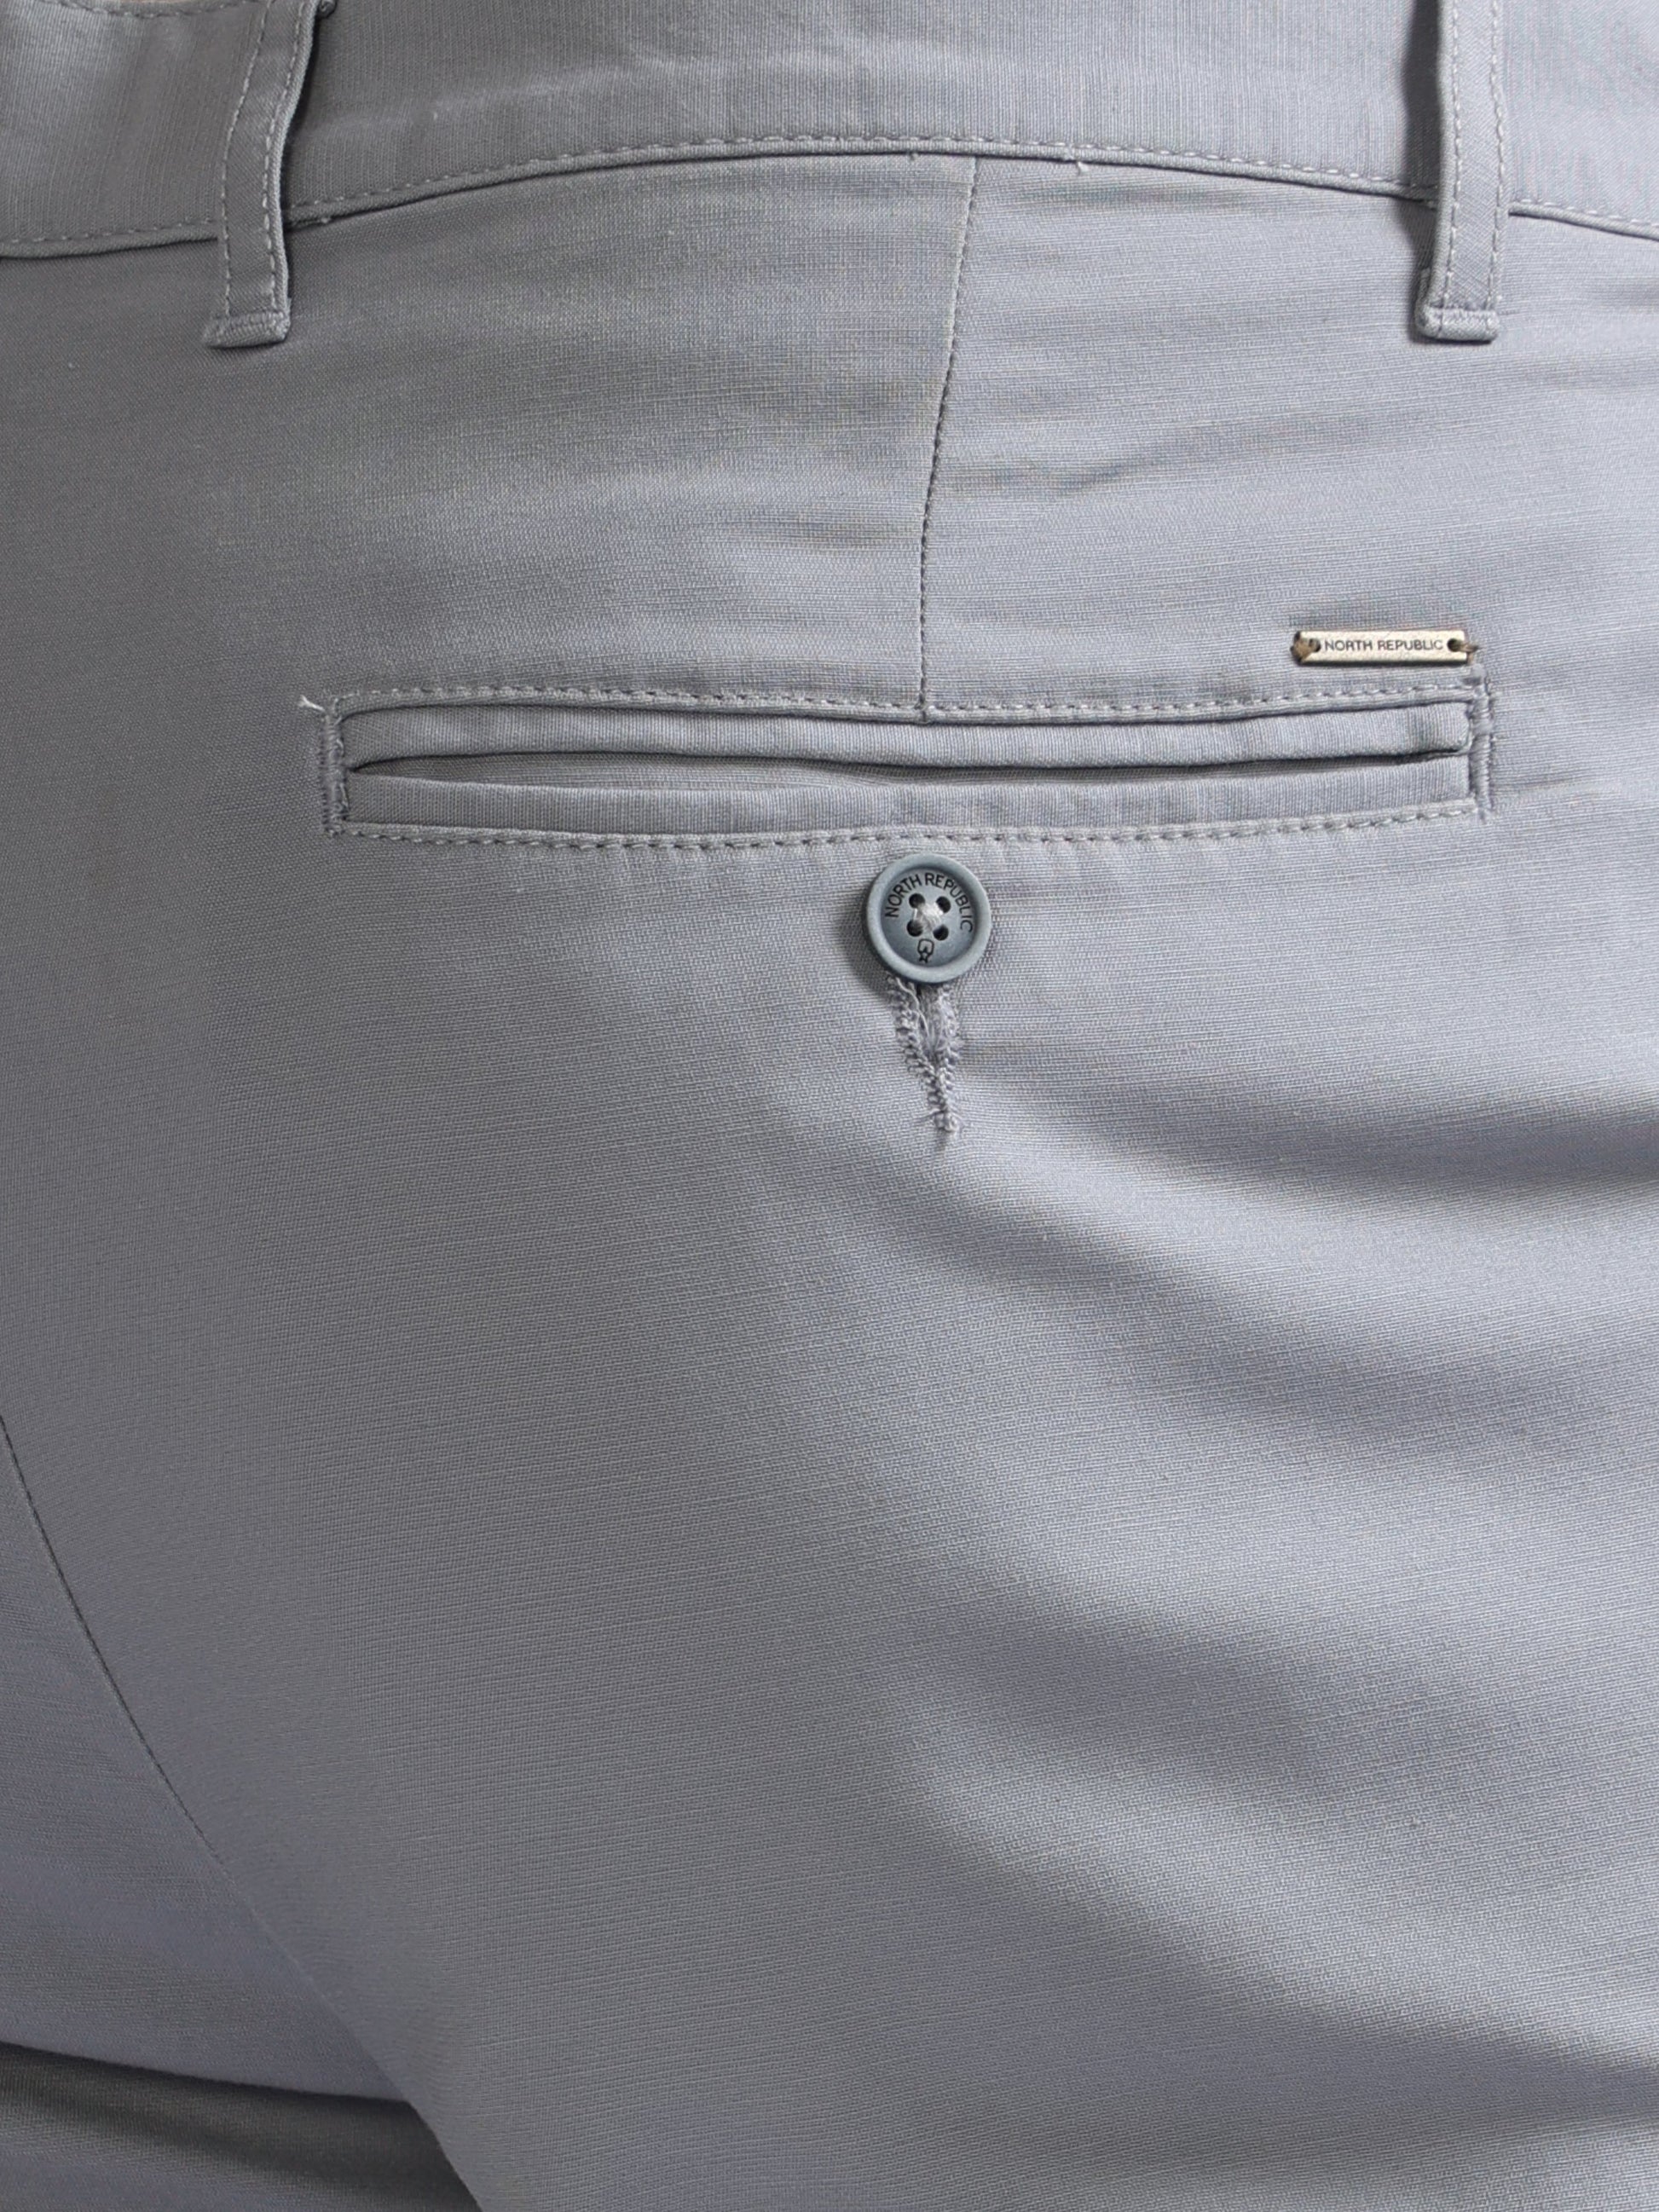 Buy Classy Cotton Stretch Trousers Online.